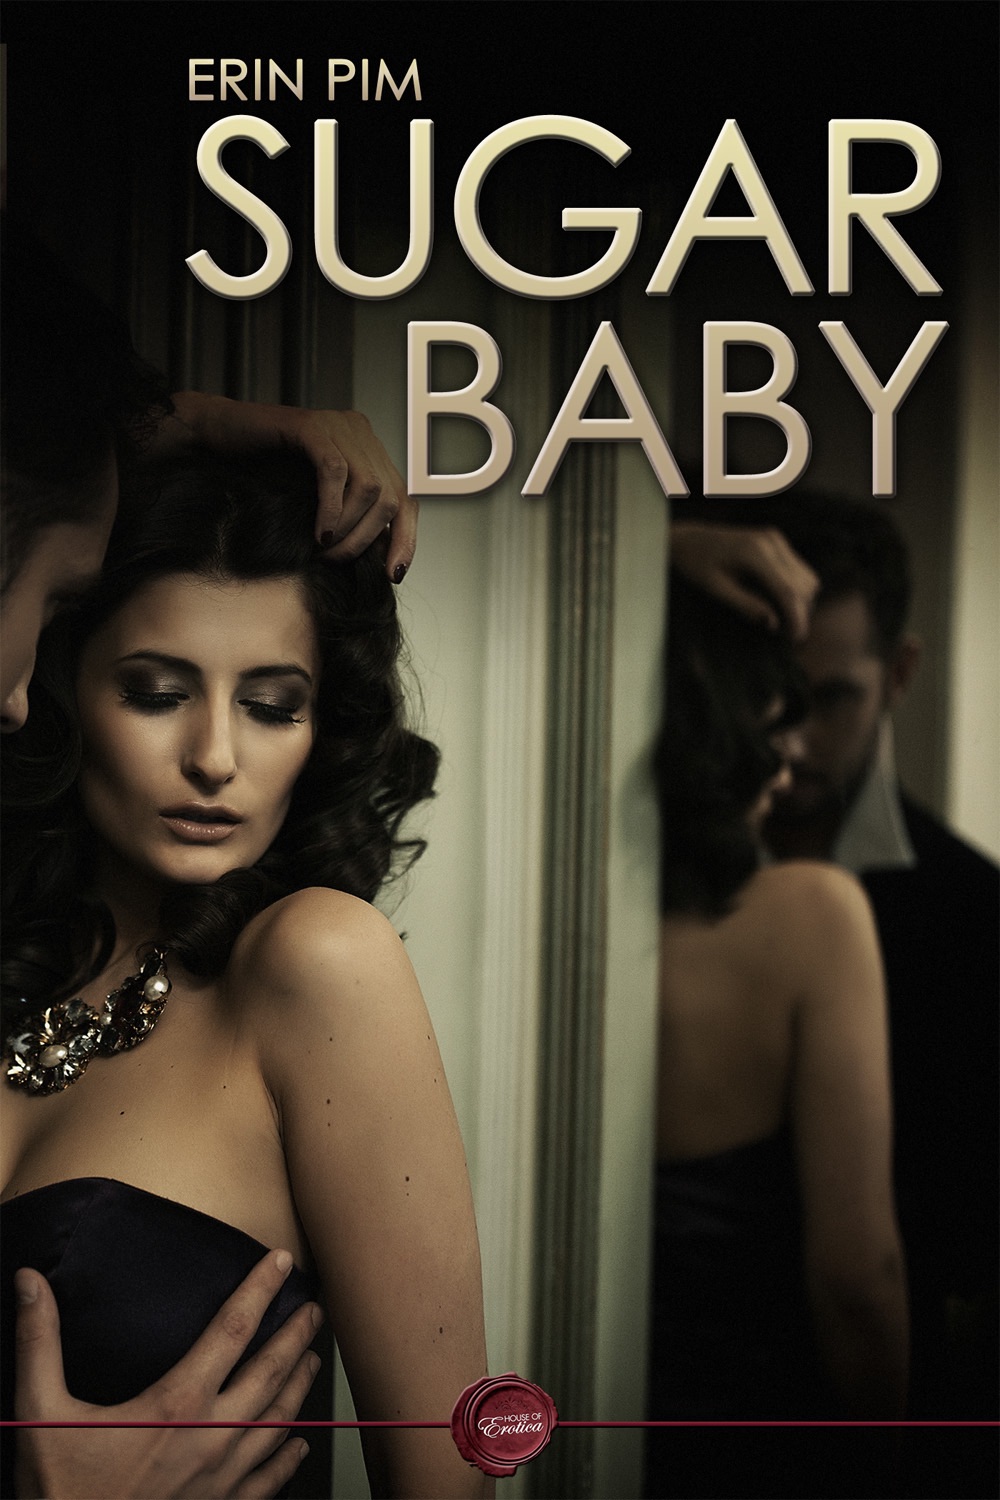 check out my novella, exploring the lives of sugar daddies and the women known as "sugar babies"!